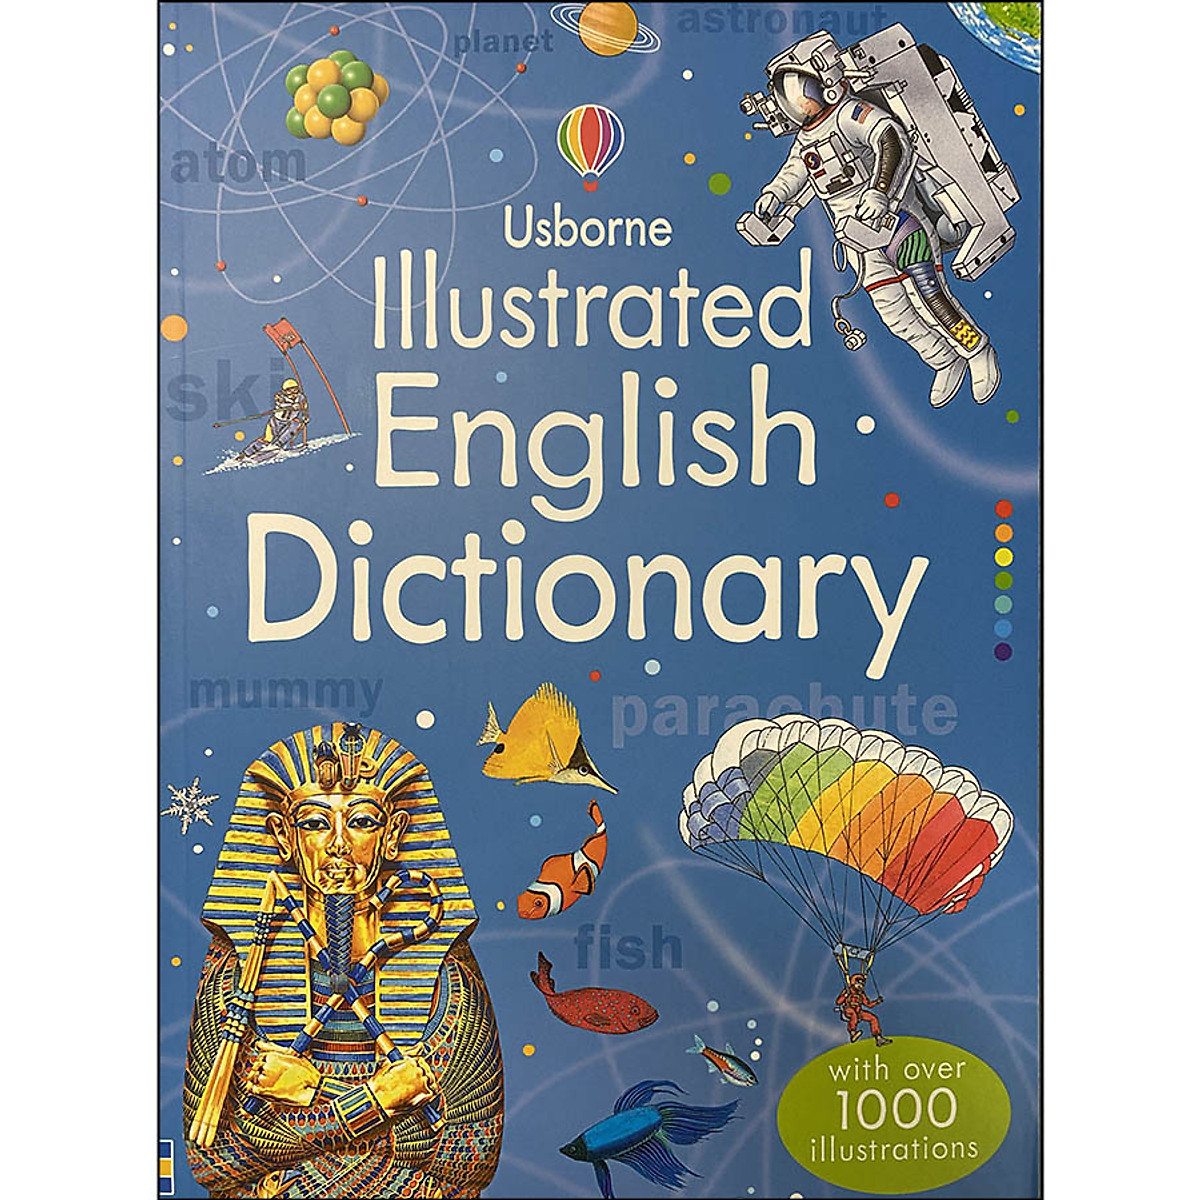 Sách tiếng Anh - Usborne Illustrated English Dictionary (With Over 1000 Illustrations)